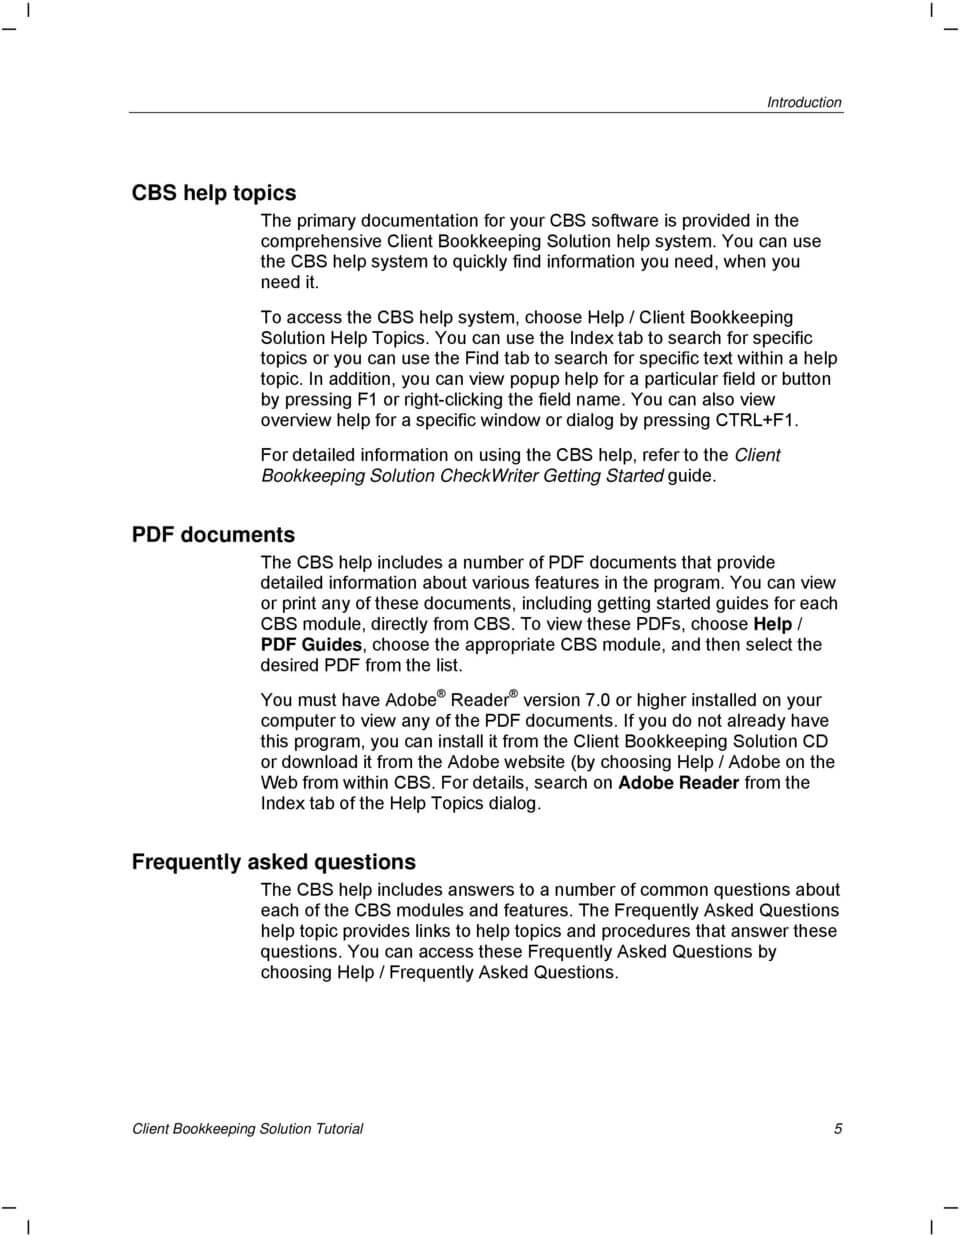 Letter Of Engagement Template For Bookkeeper ] – How To In Bookkeeping Letter Of Engagement Template